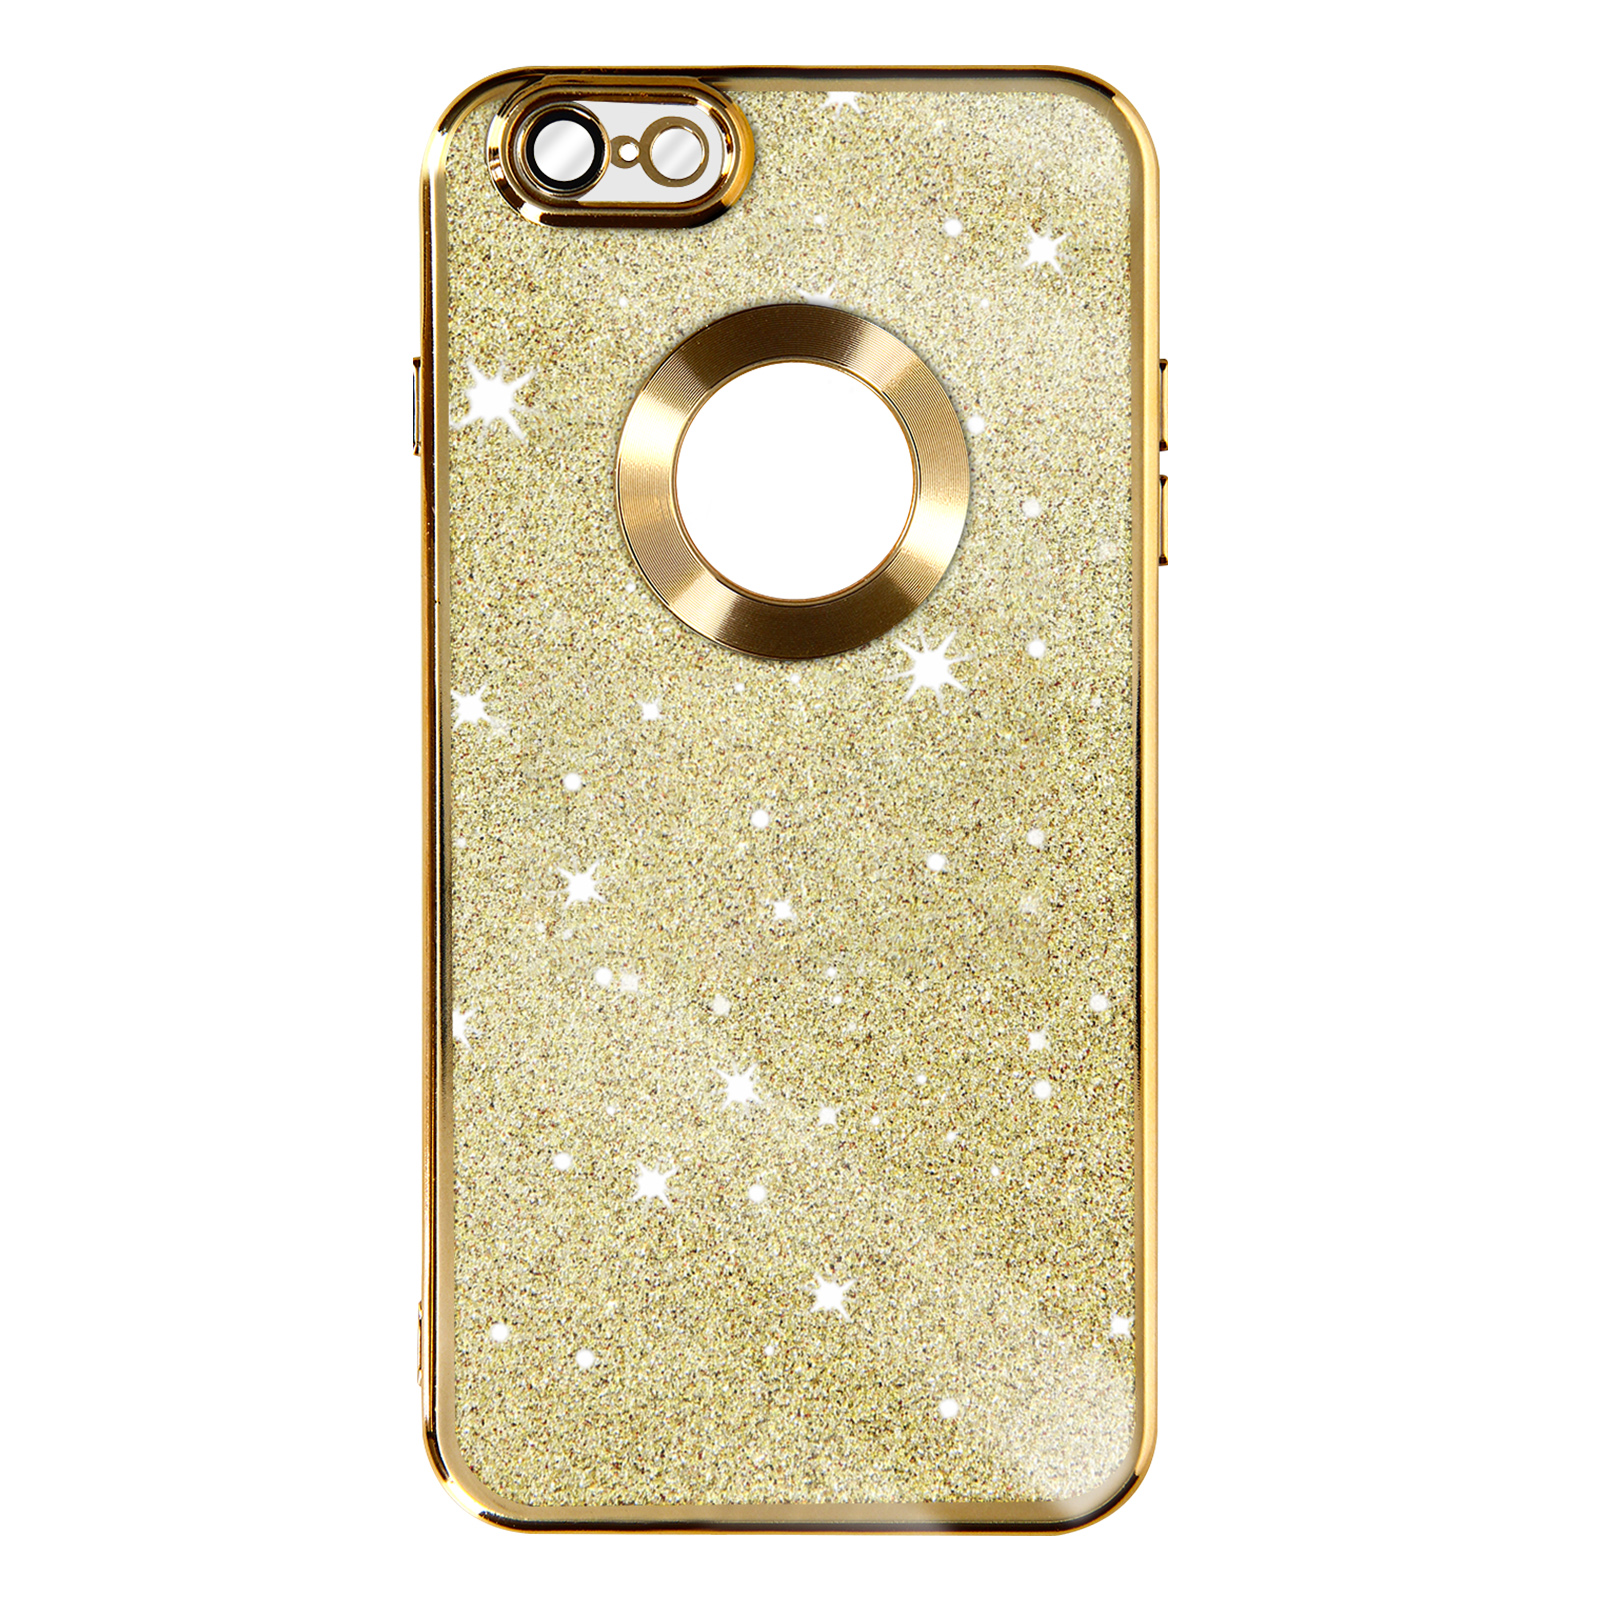 Protecam Plus, Gold Spark AVIZAR Apple, 6S Series, Backcover, iPhone